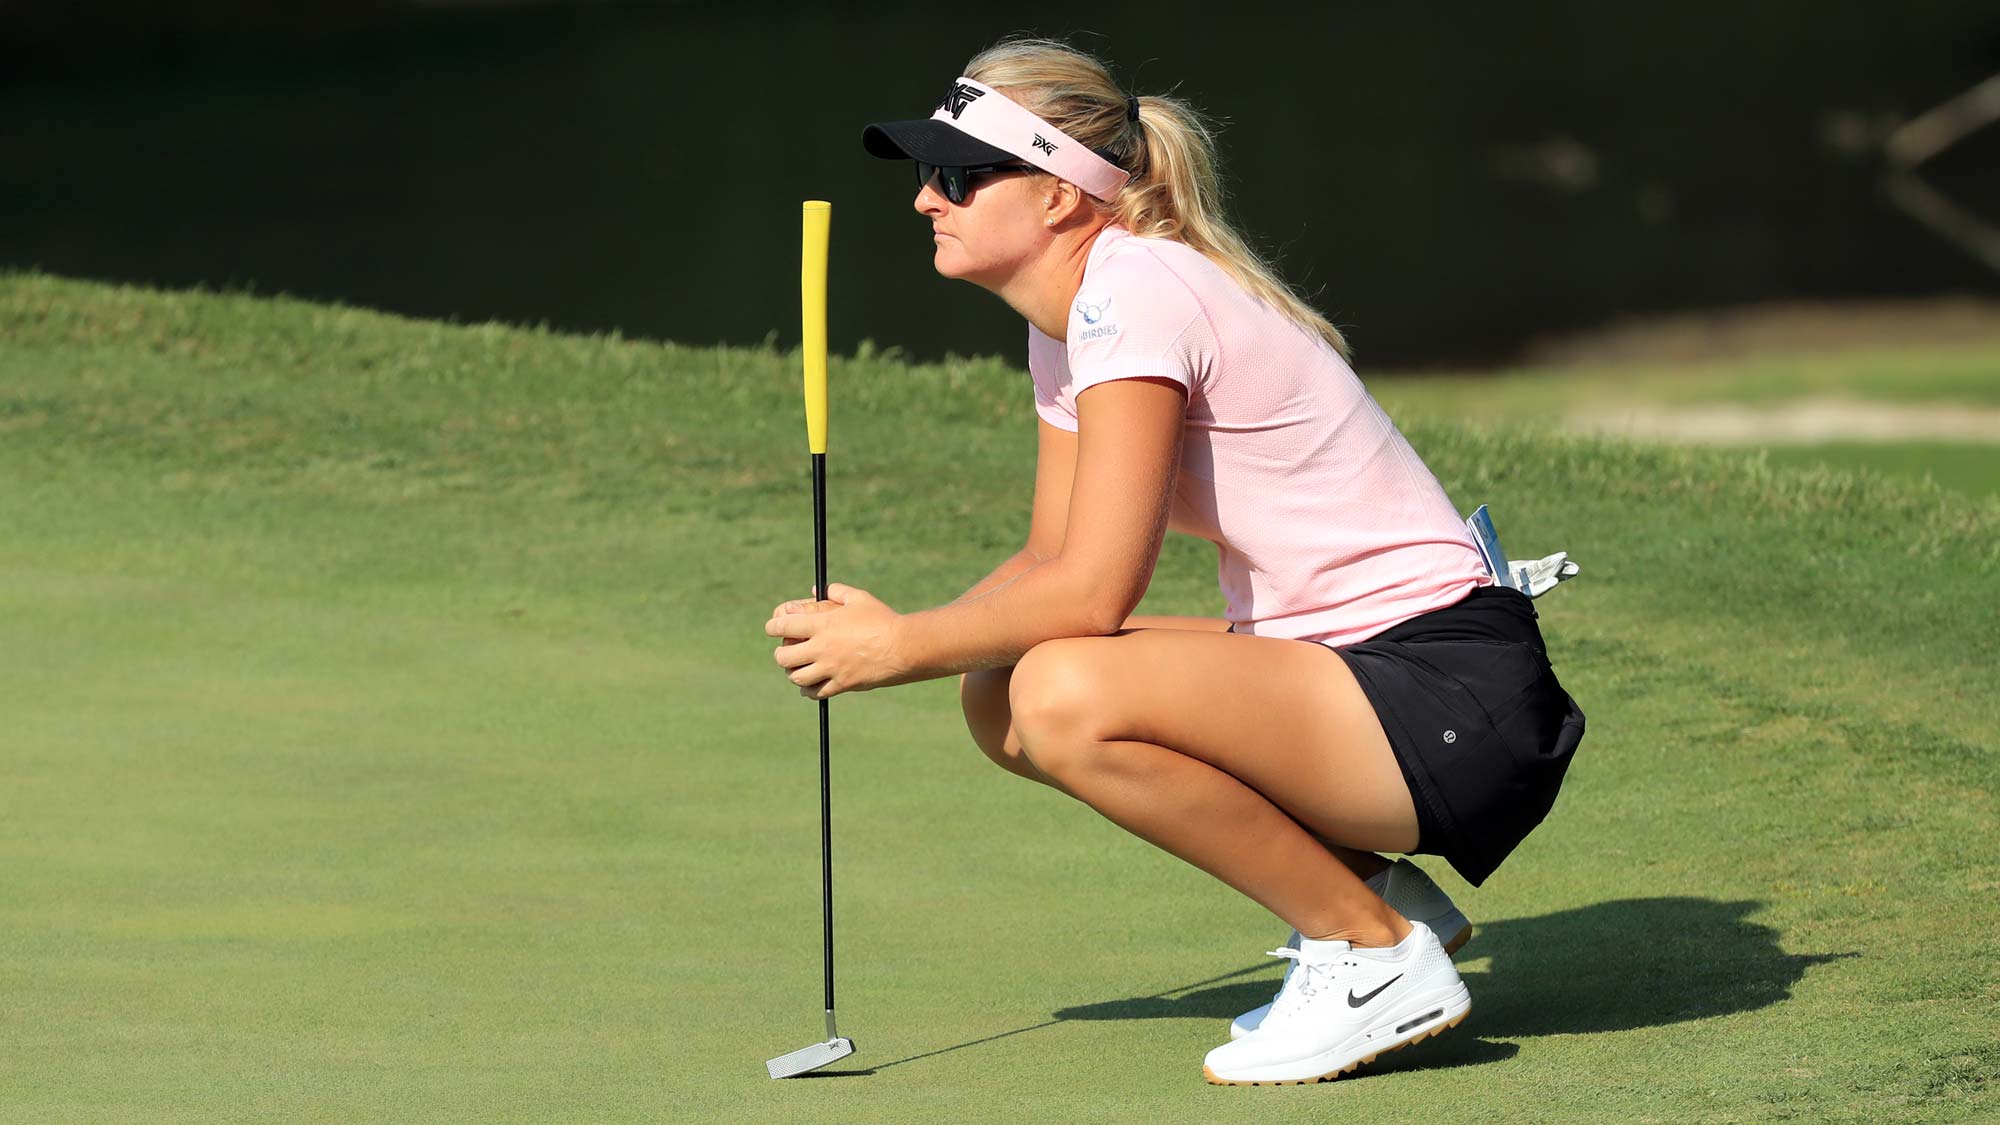 Anna Nordqvist of Sweden lines up her putt on the third hole during the first round of the Pure Silk Championship